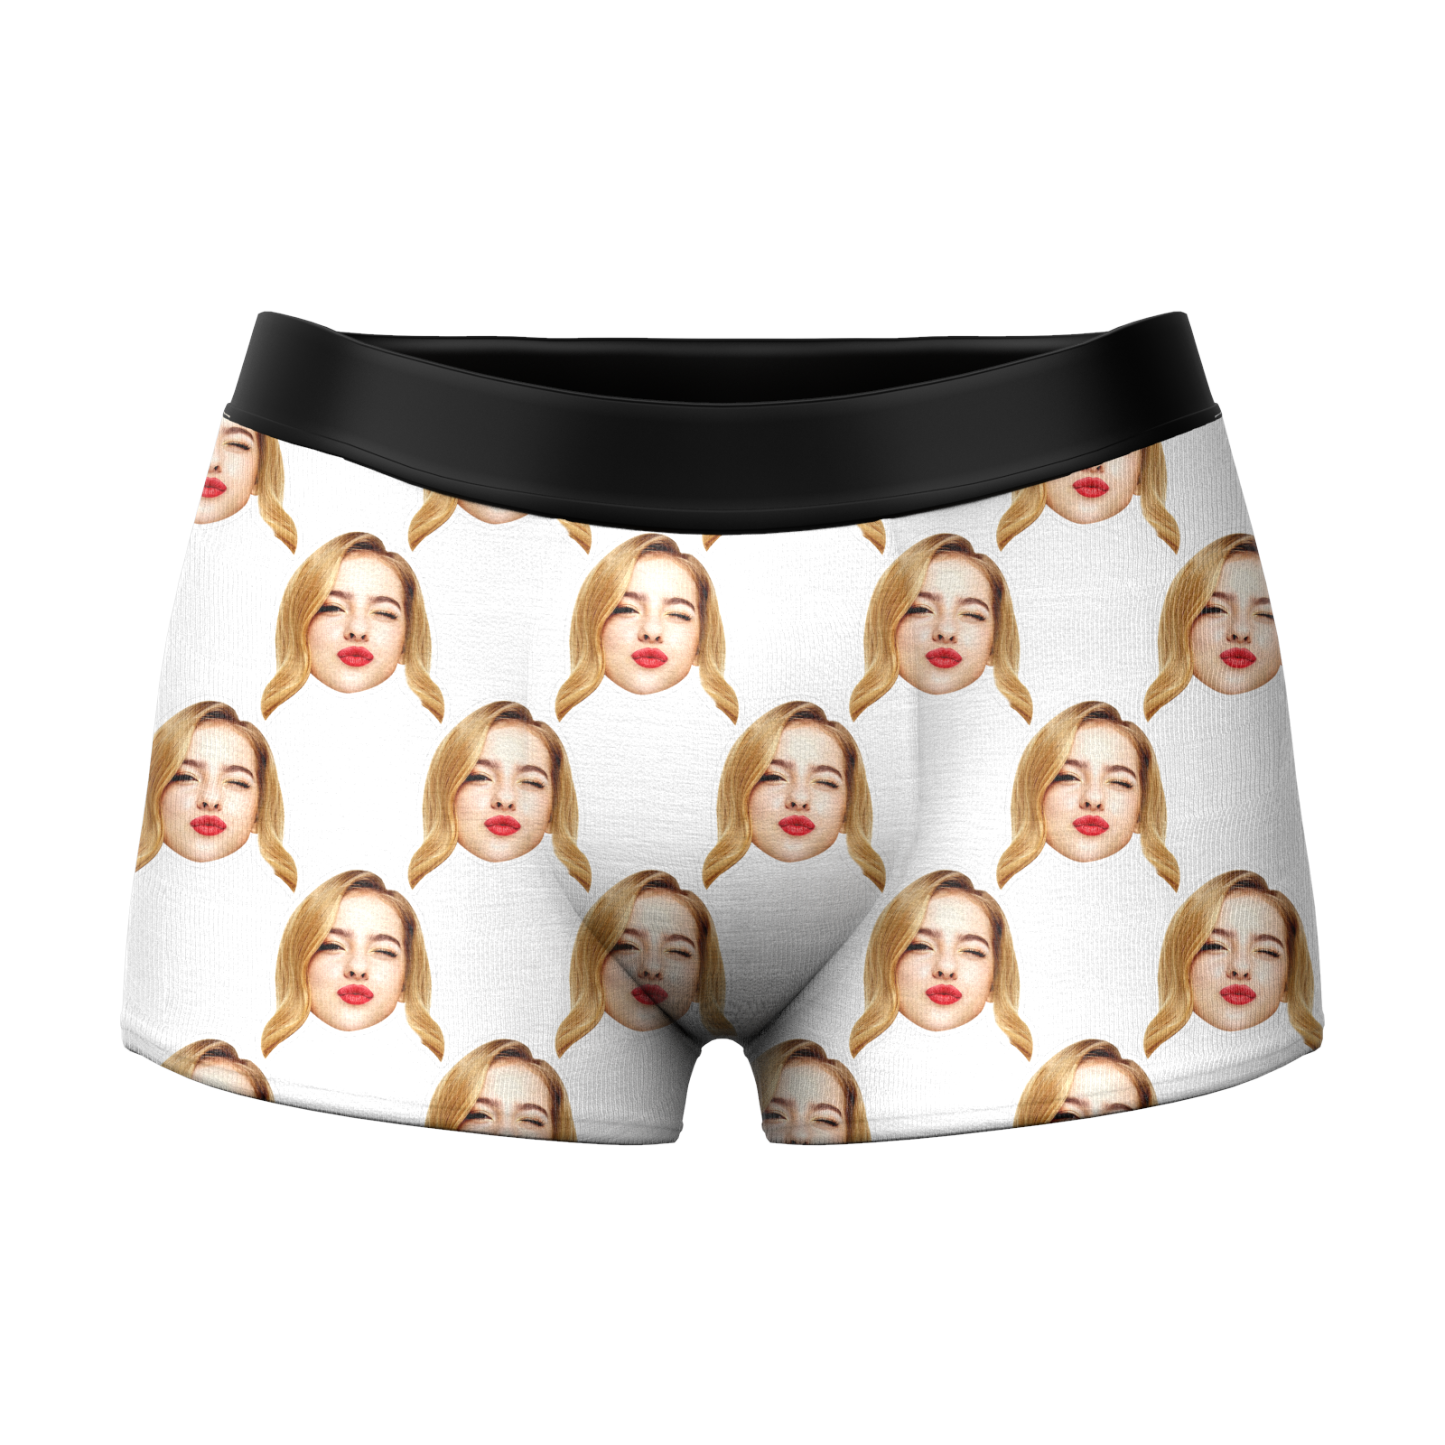 Men's Custom Face Boxer Shorts Colorful Personalized Underwear Gift For Him